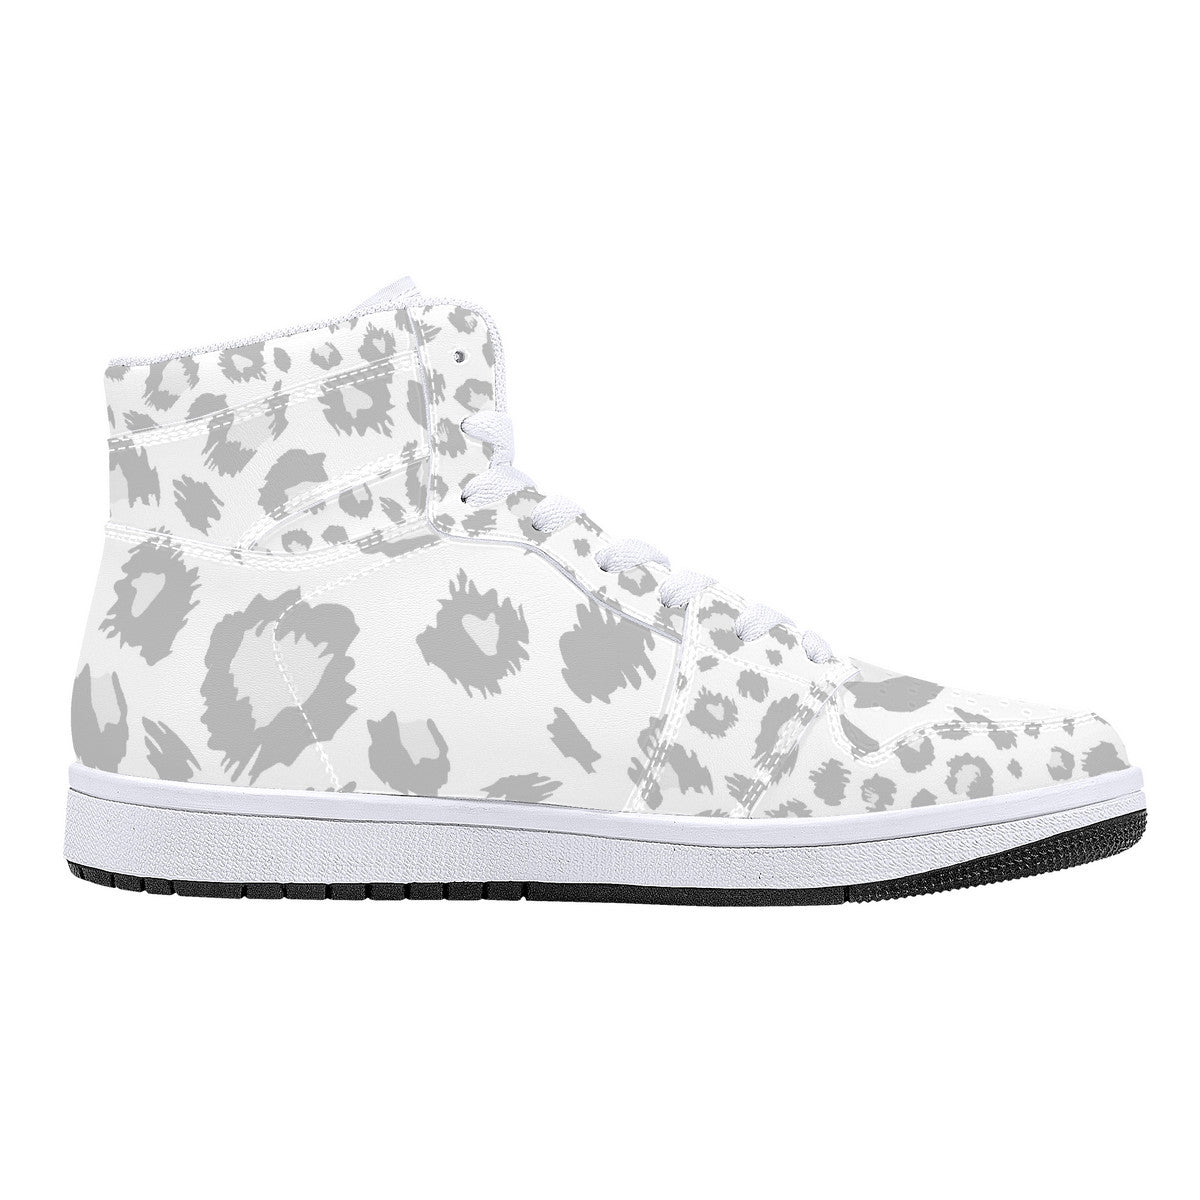 "Nix Jaguar" High-Top Synthetic Leather Sneakers